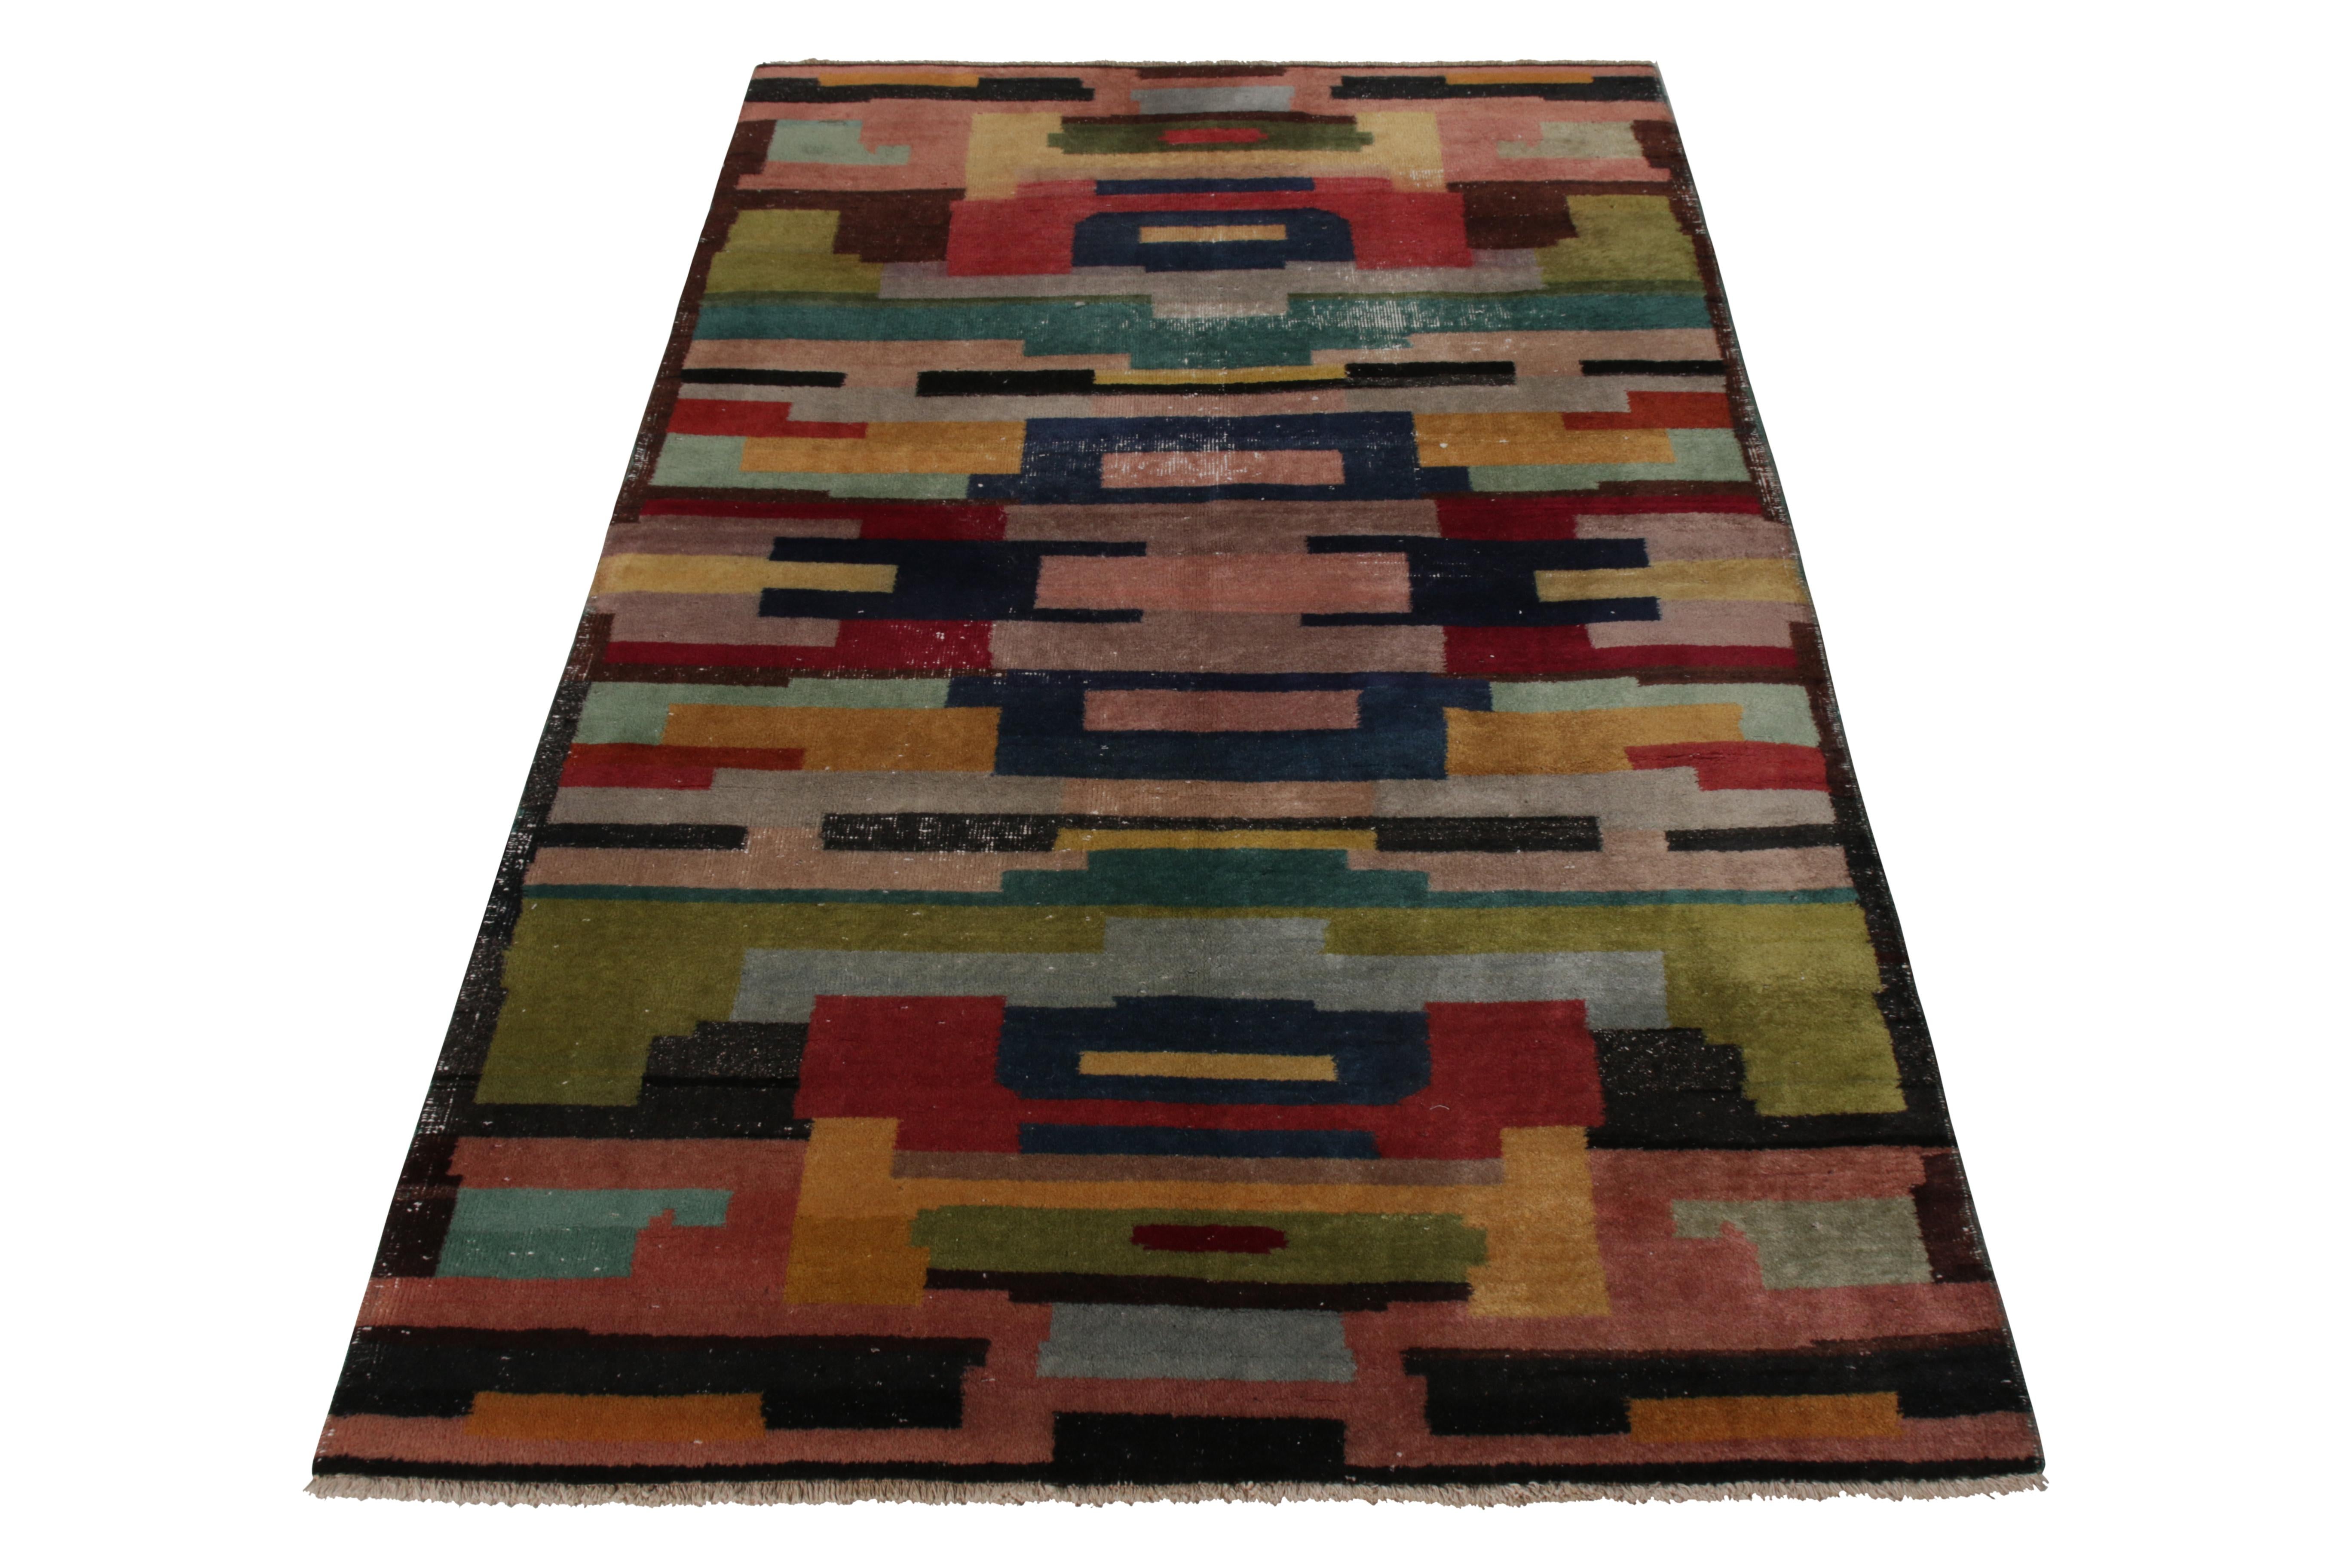 A vintage 4 x 8 rug connoting a mid-century Deco style, hand knotted in wool originating from Turkey, circa 1950-1960. Hand knotted in wool, enjoying a whimsical, delicious palette of pinks, browns, reds, and blues among near-countless colors.